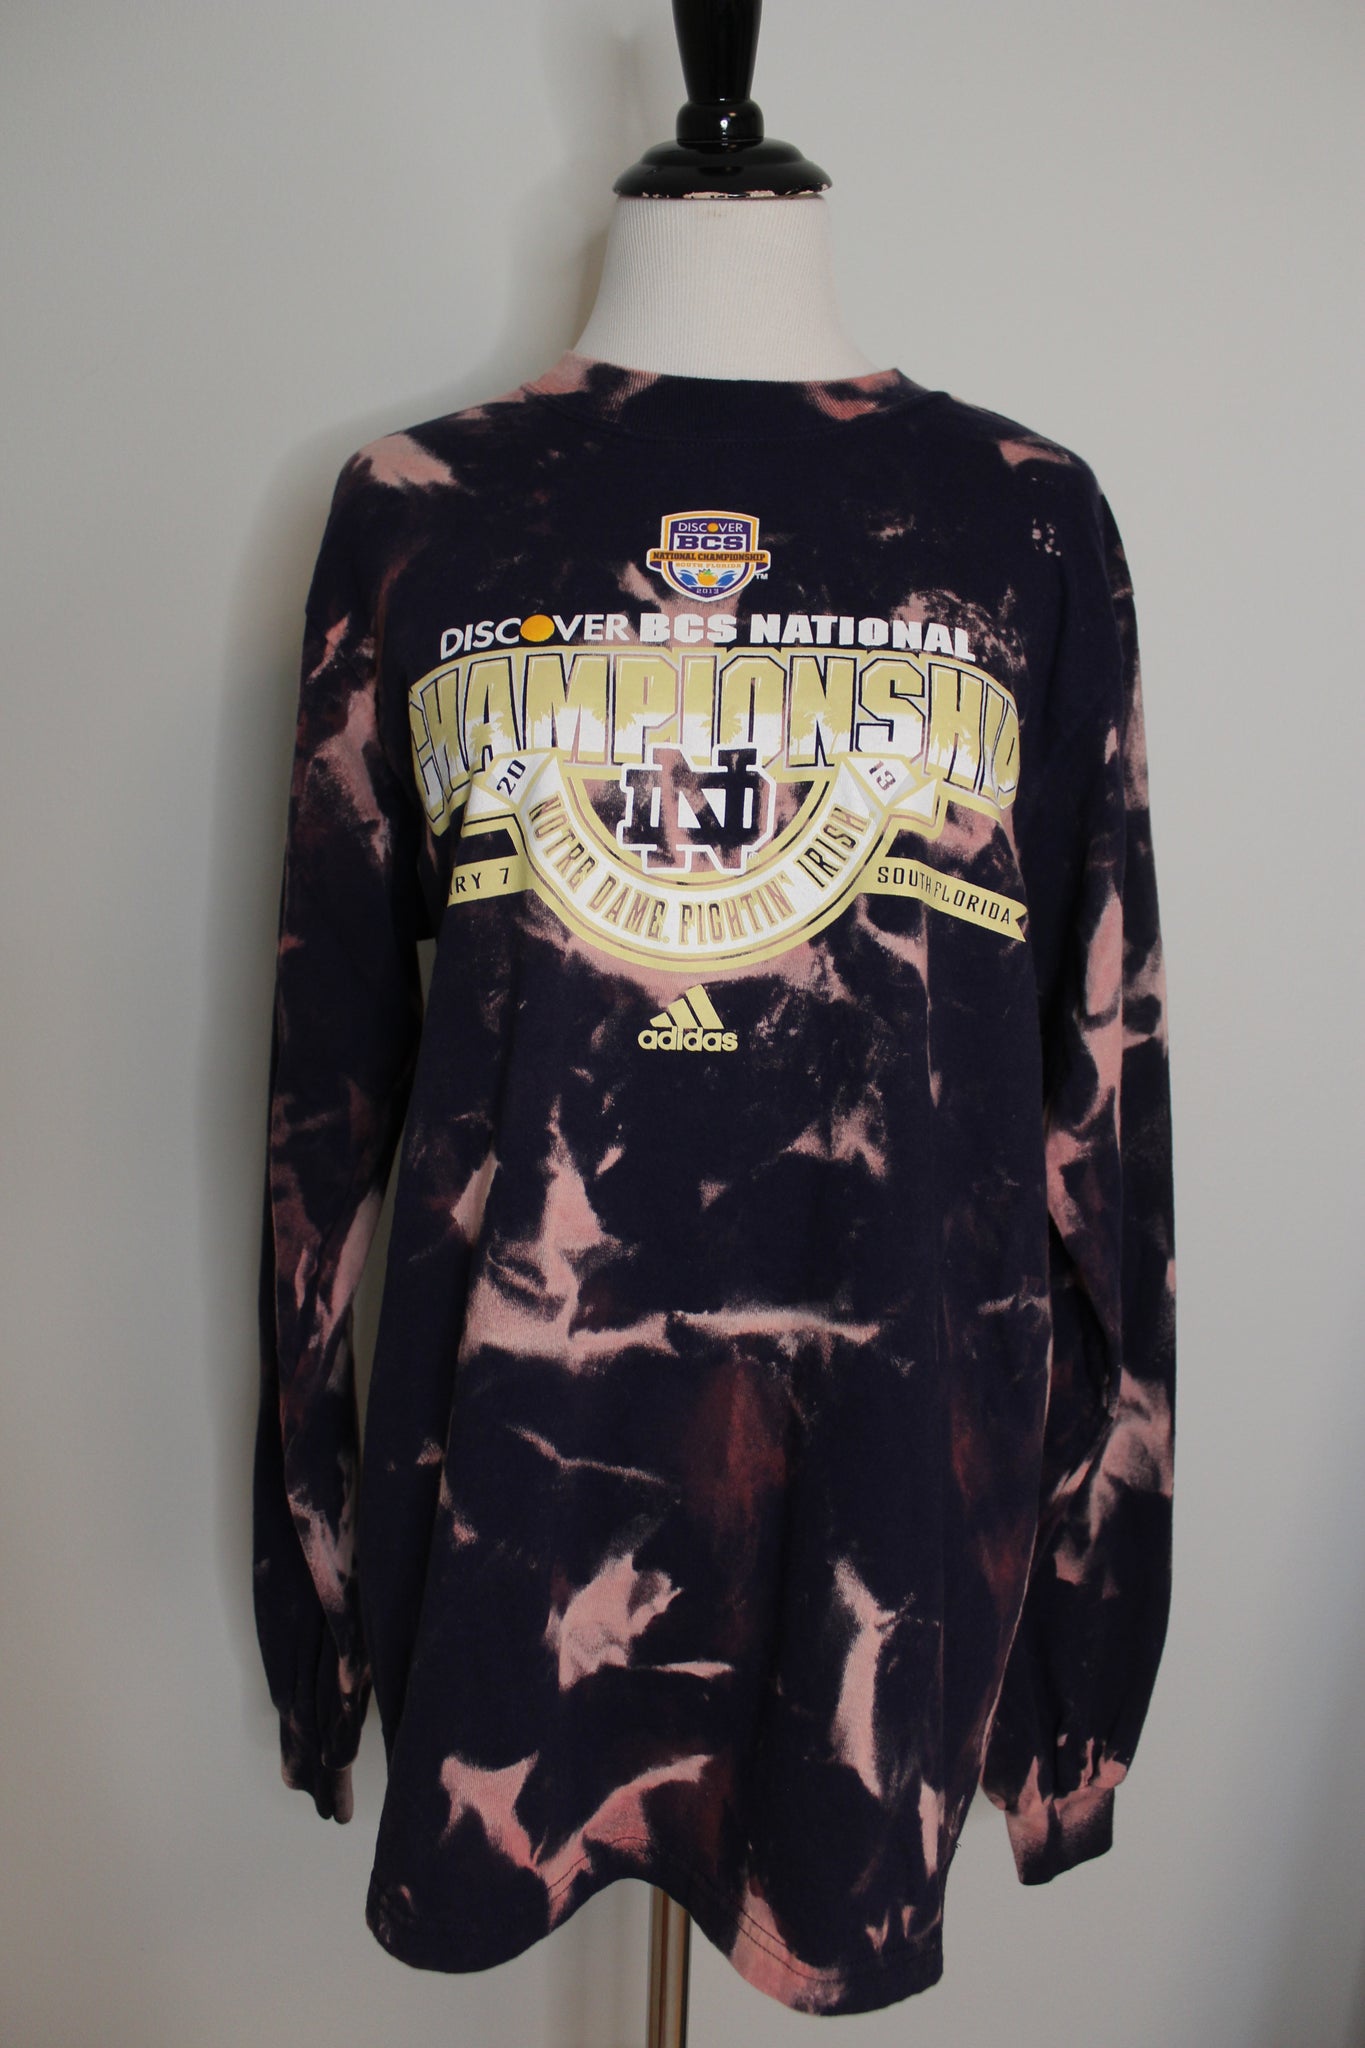 University of Notre Dame 2013 National Championship Bleached Long Sleeve Shirt